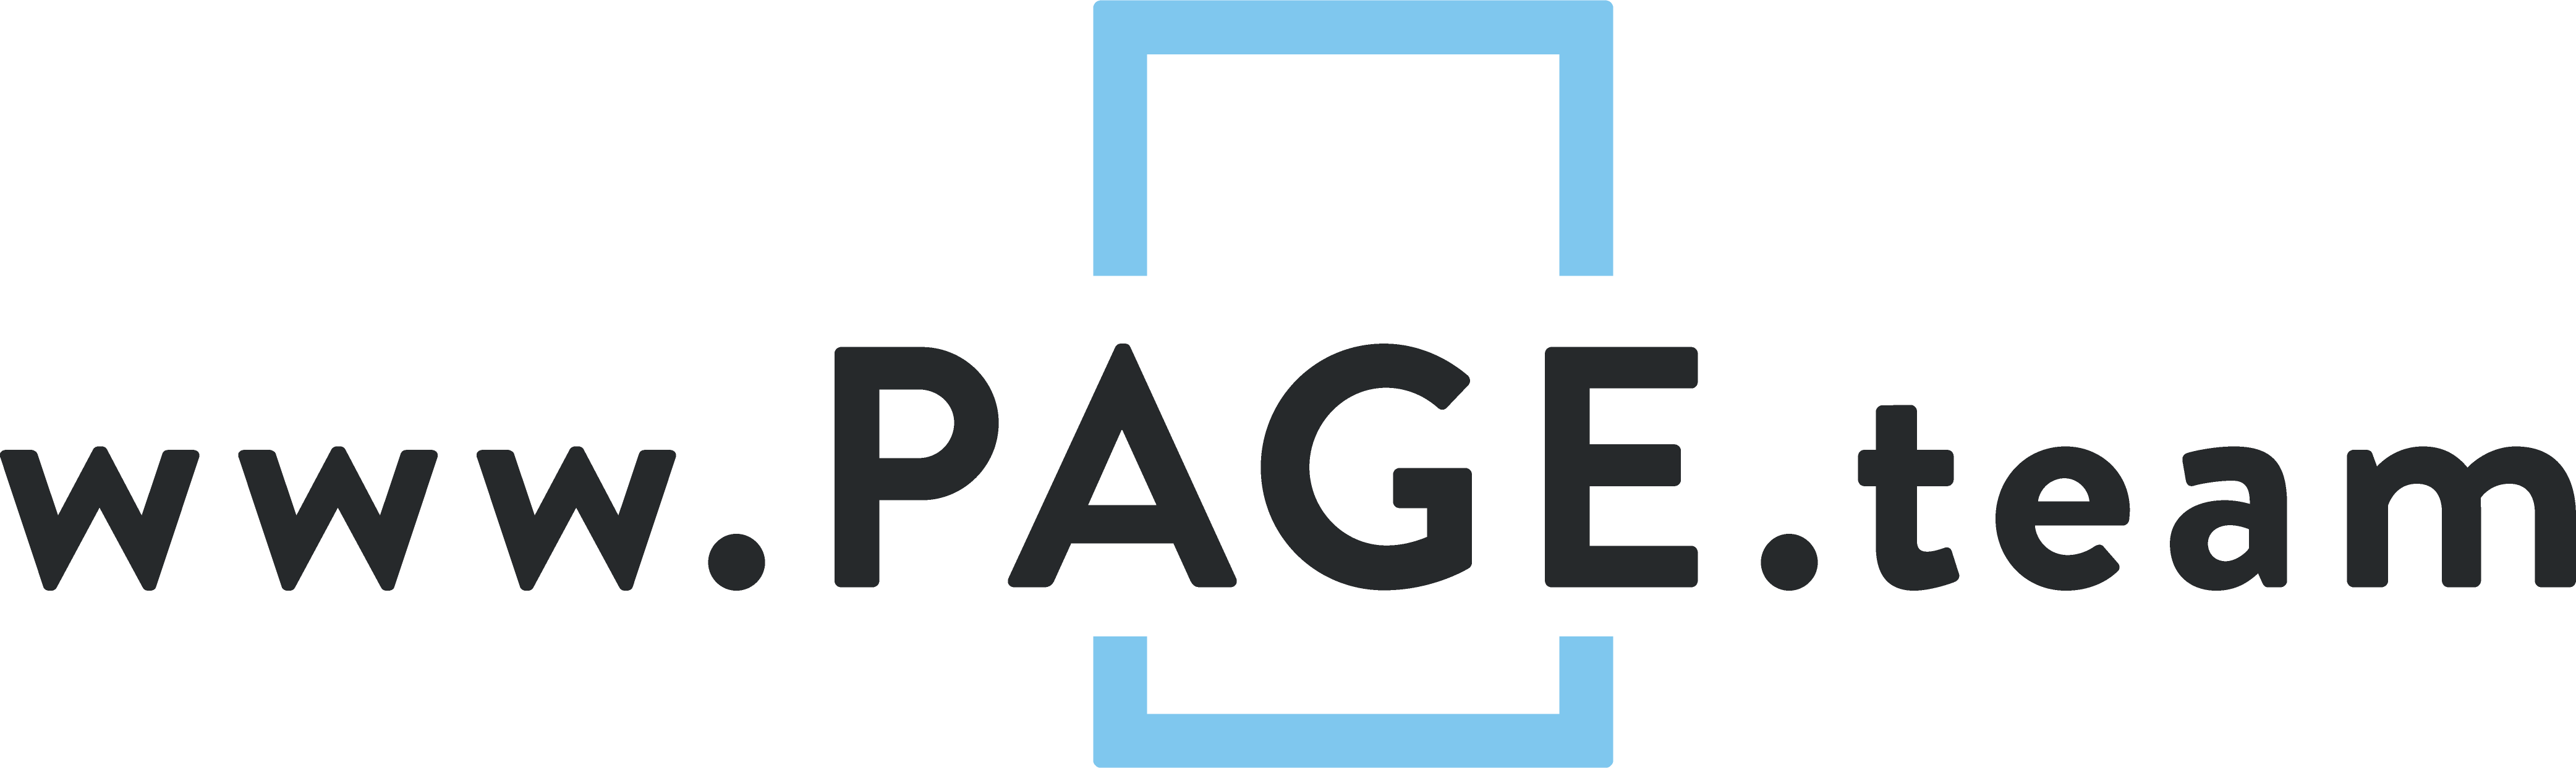 Page Insurance